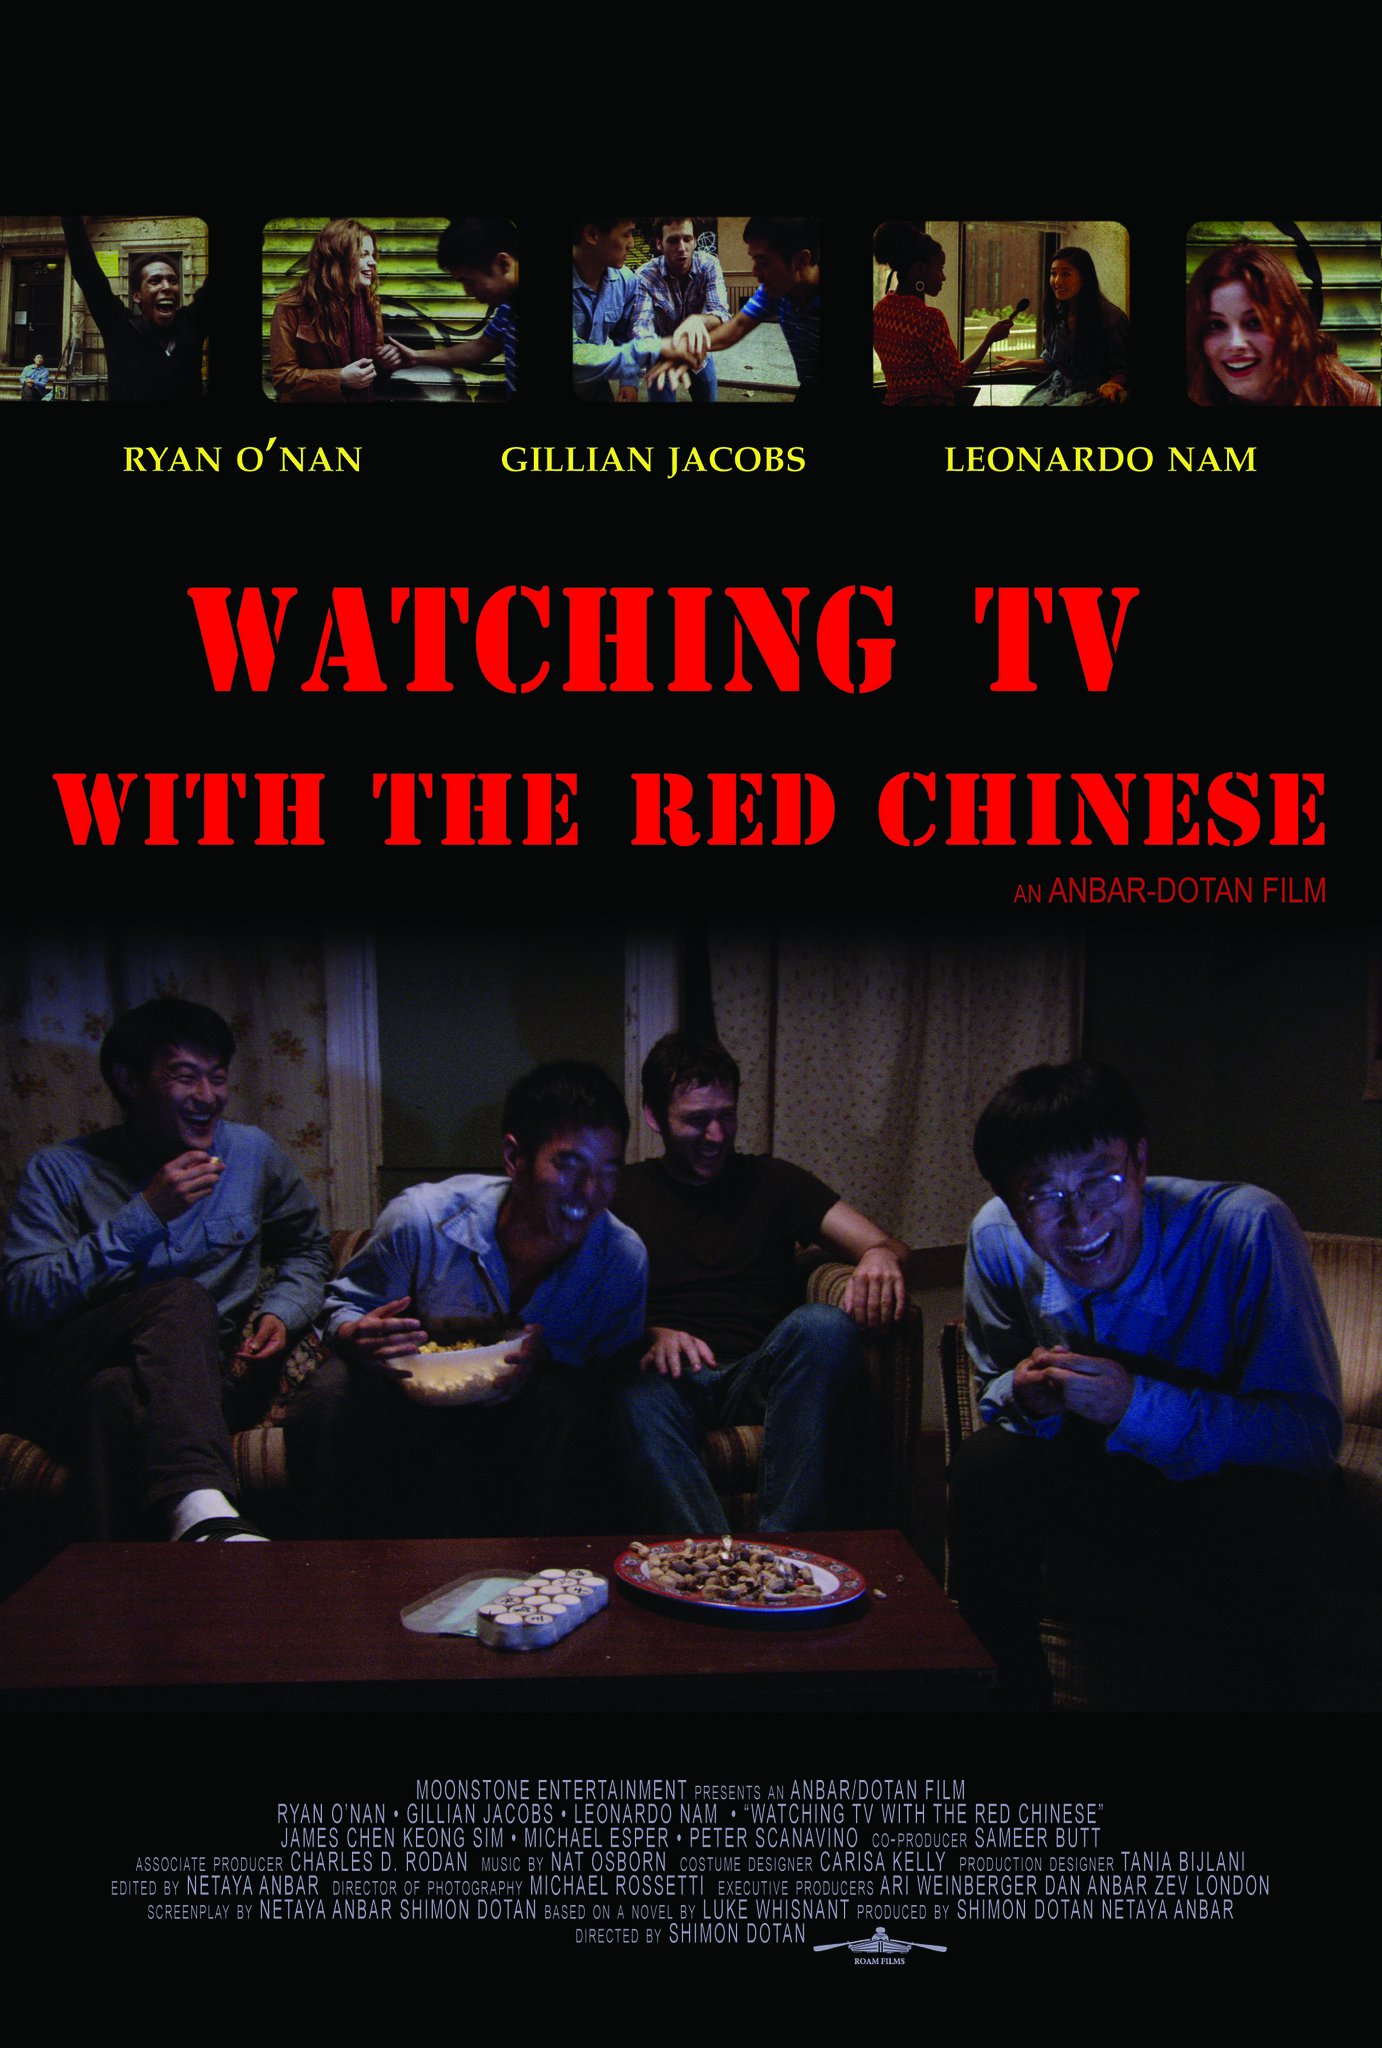 Фото - Watching TV with the Red Chinese: 1382x2048 / 325 Кб